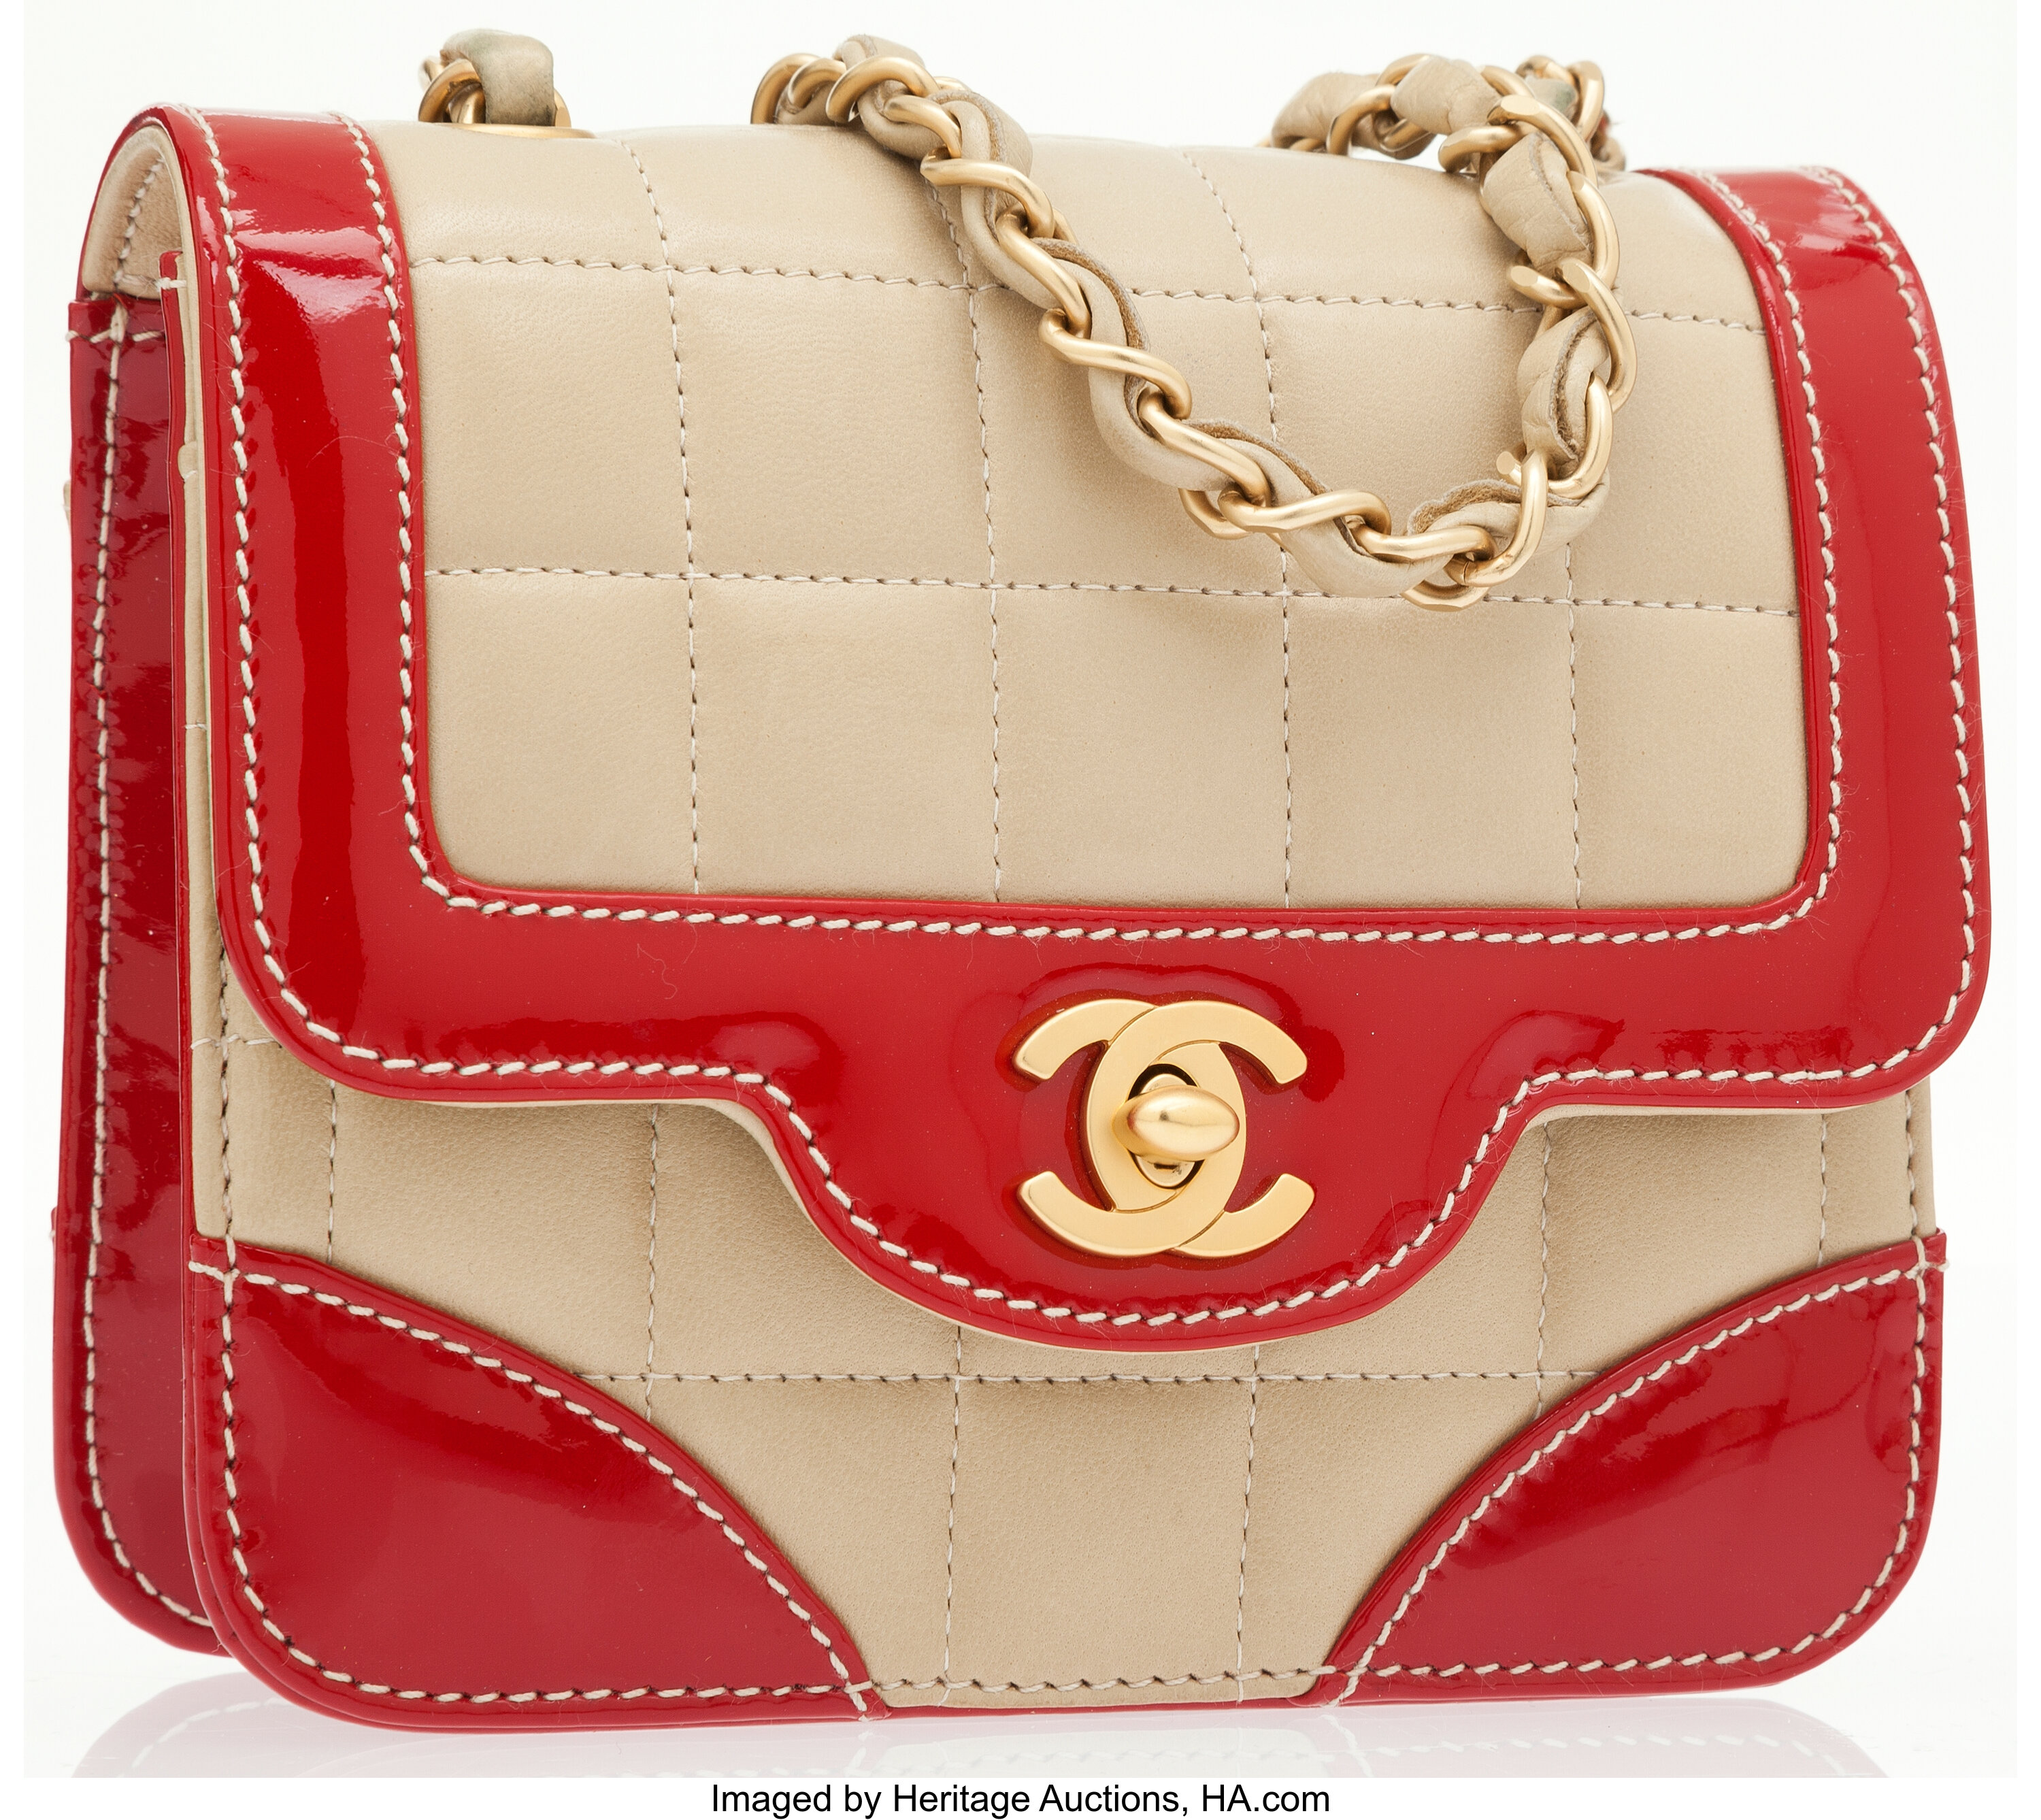 Chanel Beige & Red Lambskin Leather Quilted Mini Flap Bag